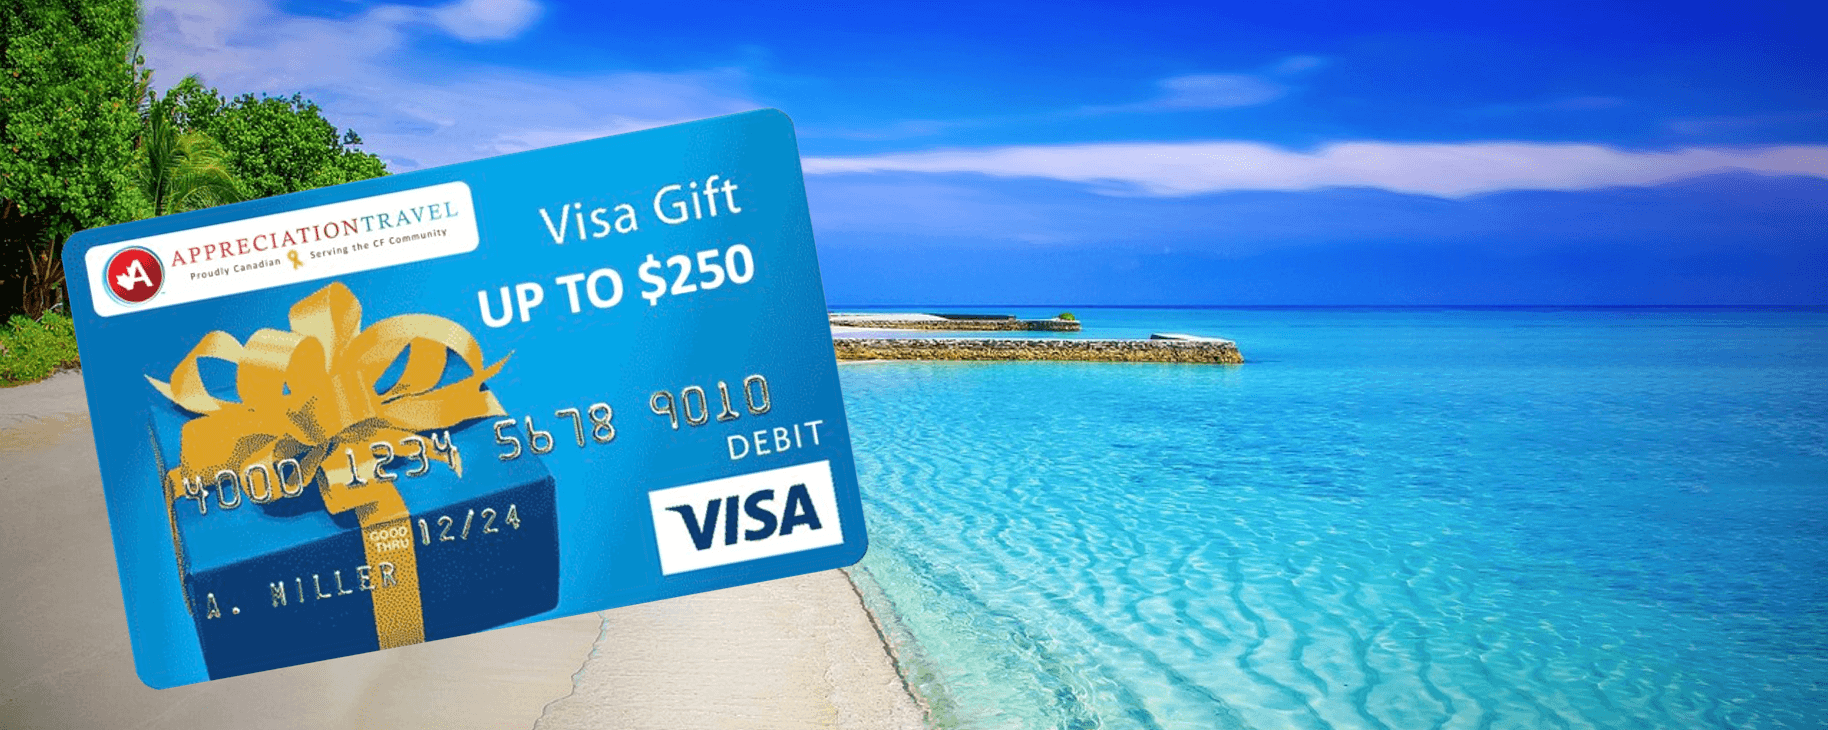 RECEIVE UP TO $250 IN VISA GIFT CARDS WHEN YOU BOOK